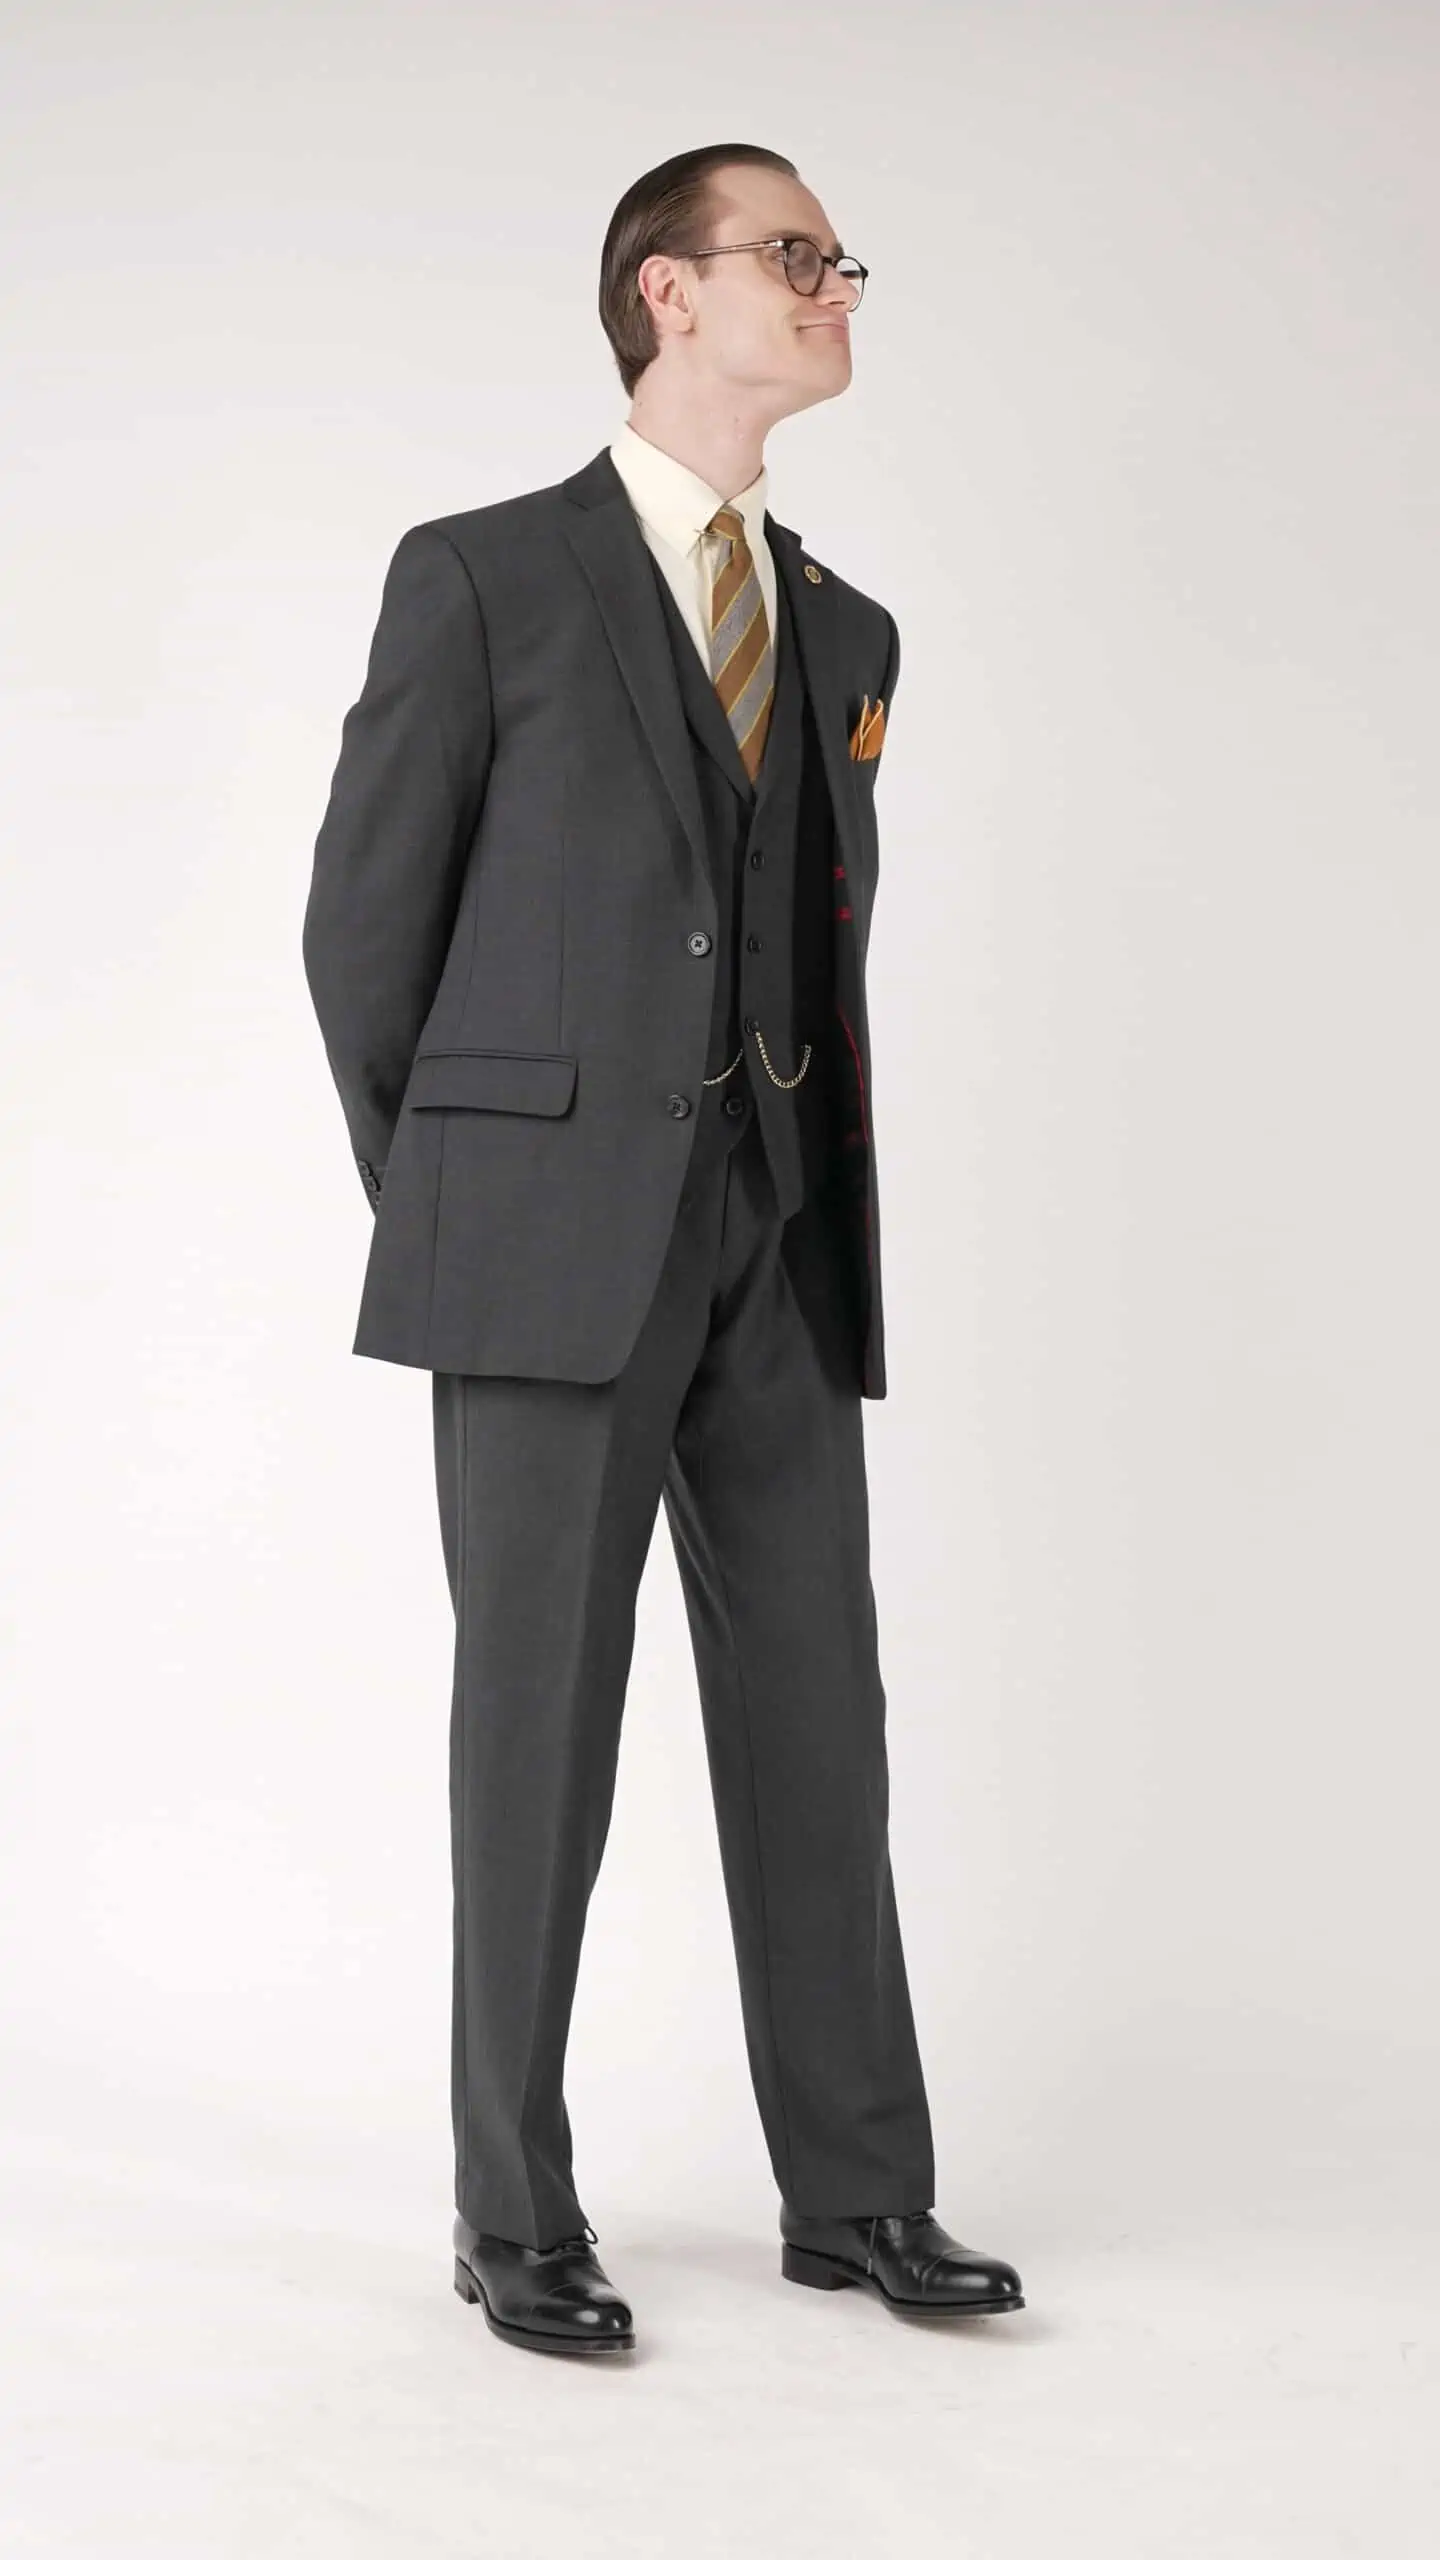 Preston showcases a charcoal three piece suit with a classic pair of black cap toe Oxfords